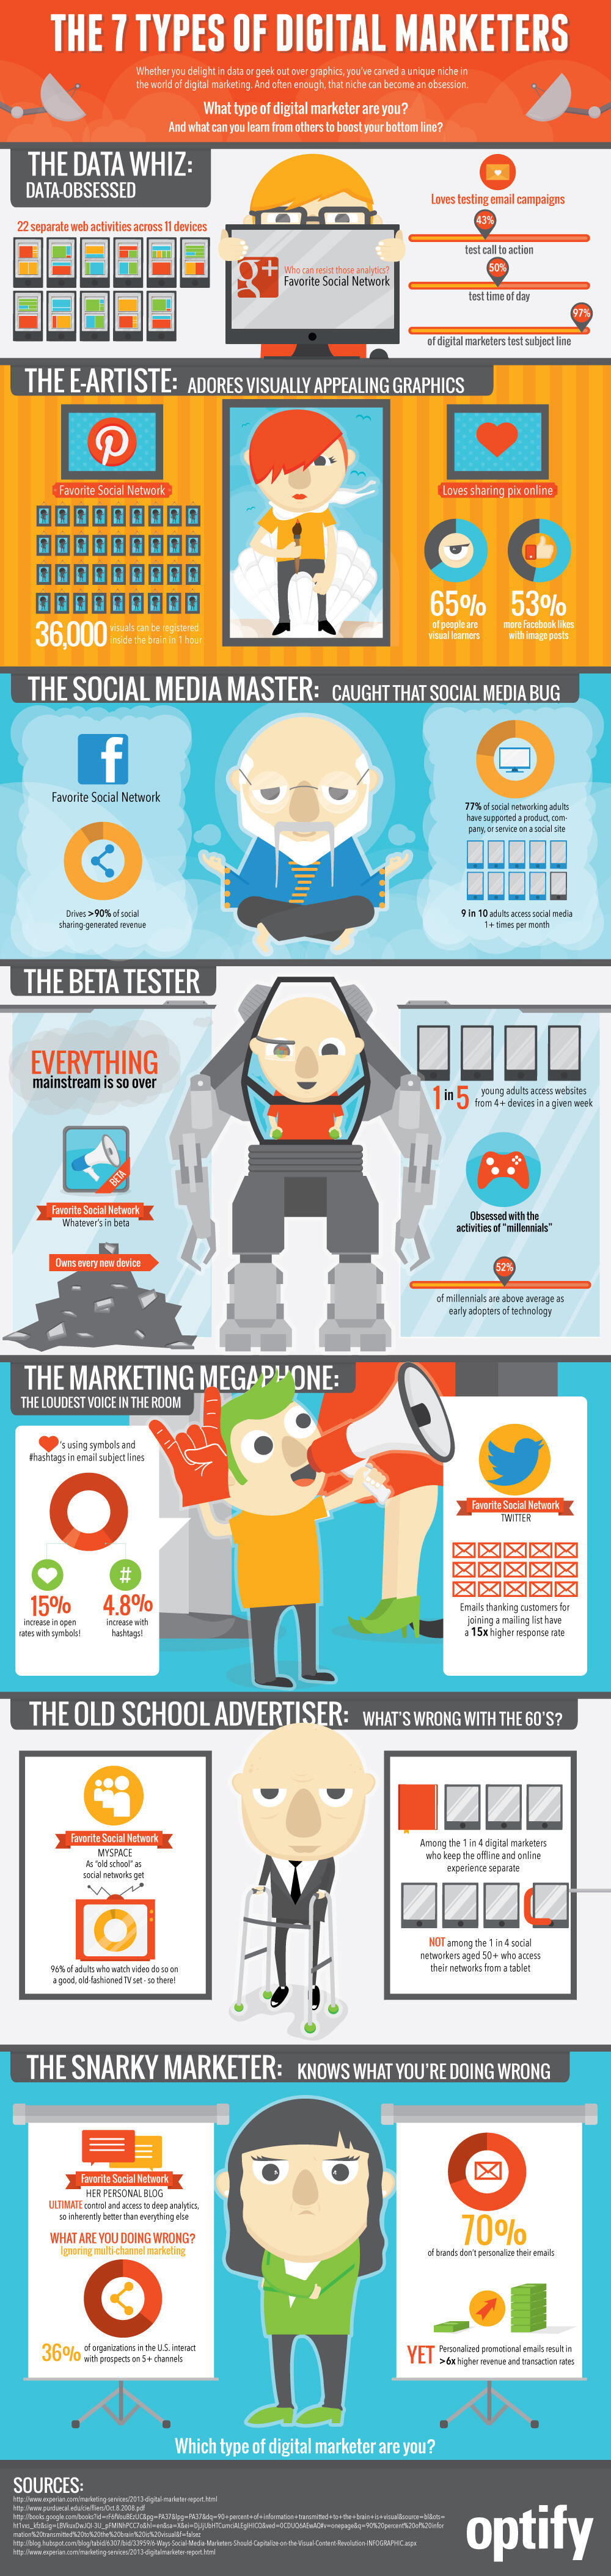 kinds-of-digital-marketers-infographic